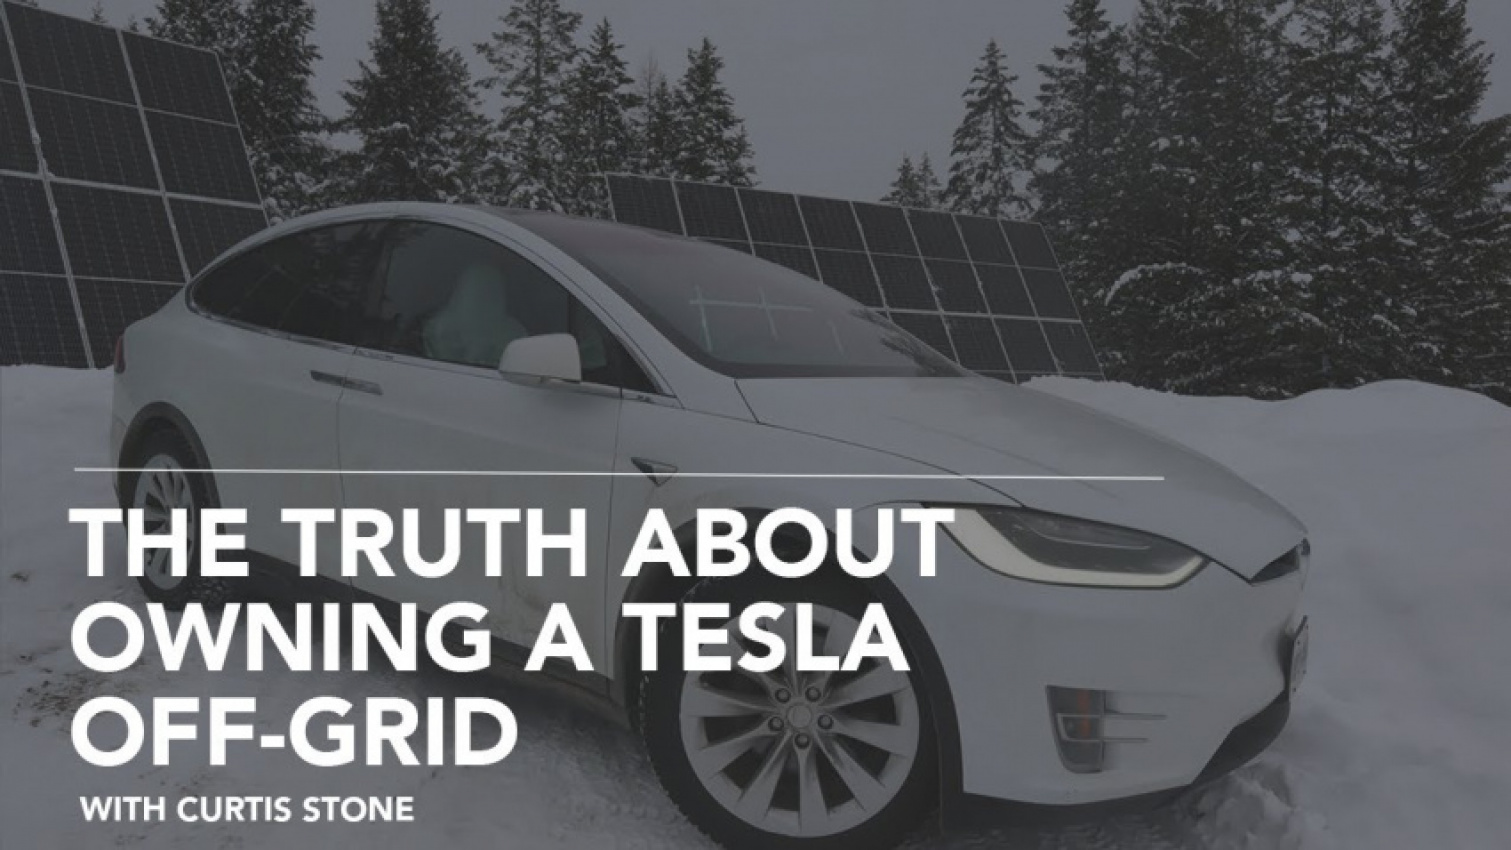 autos, cars, tesla, cost of owning a tesla, curtis stone, off grid, off grid living, off-grid solar, off-grid solar battery bank, off-grid solar power system design, off-grid solar system, tesla car, the truth about owning a tesla off-grid